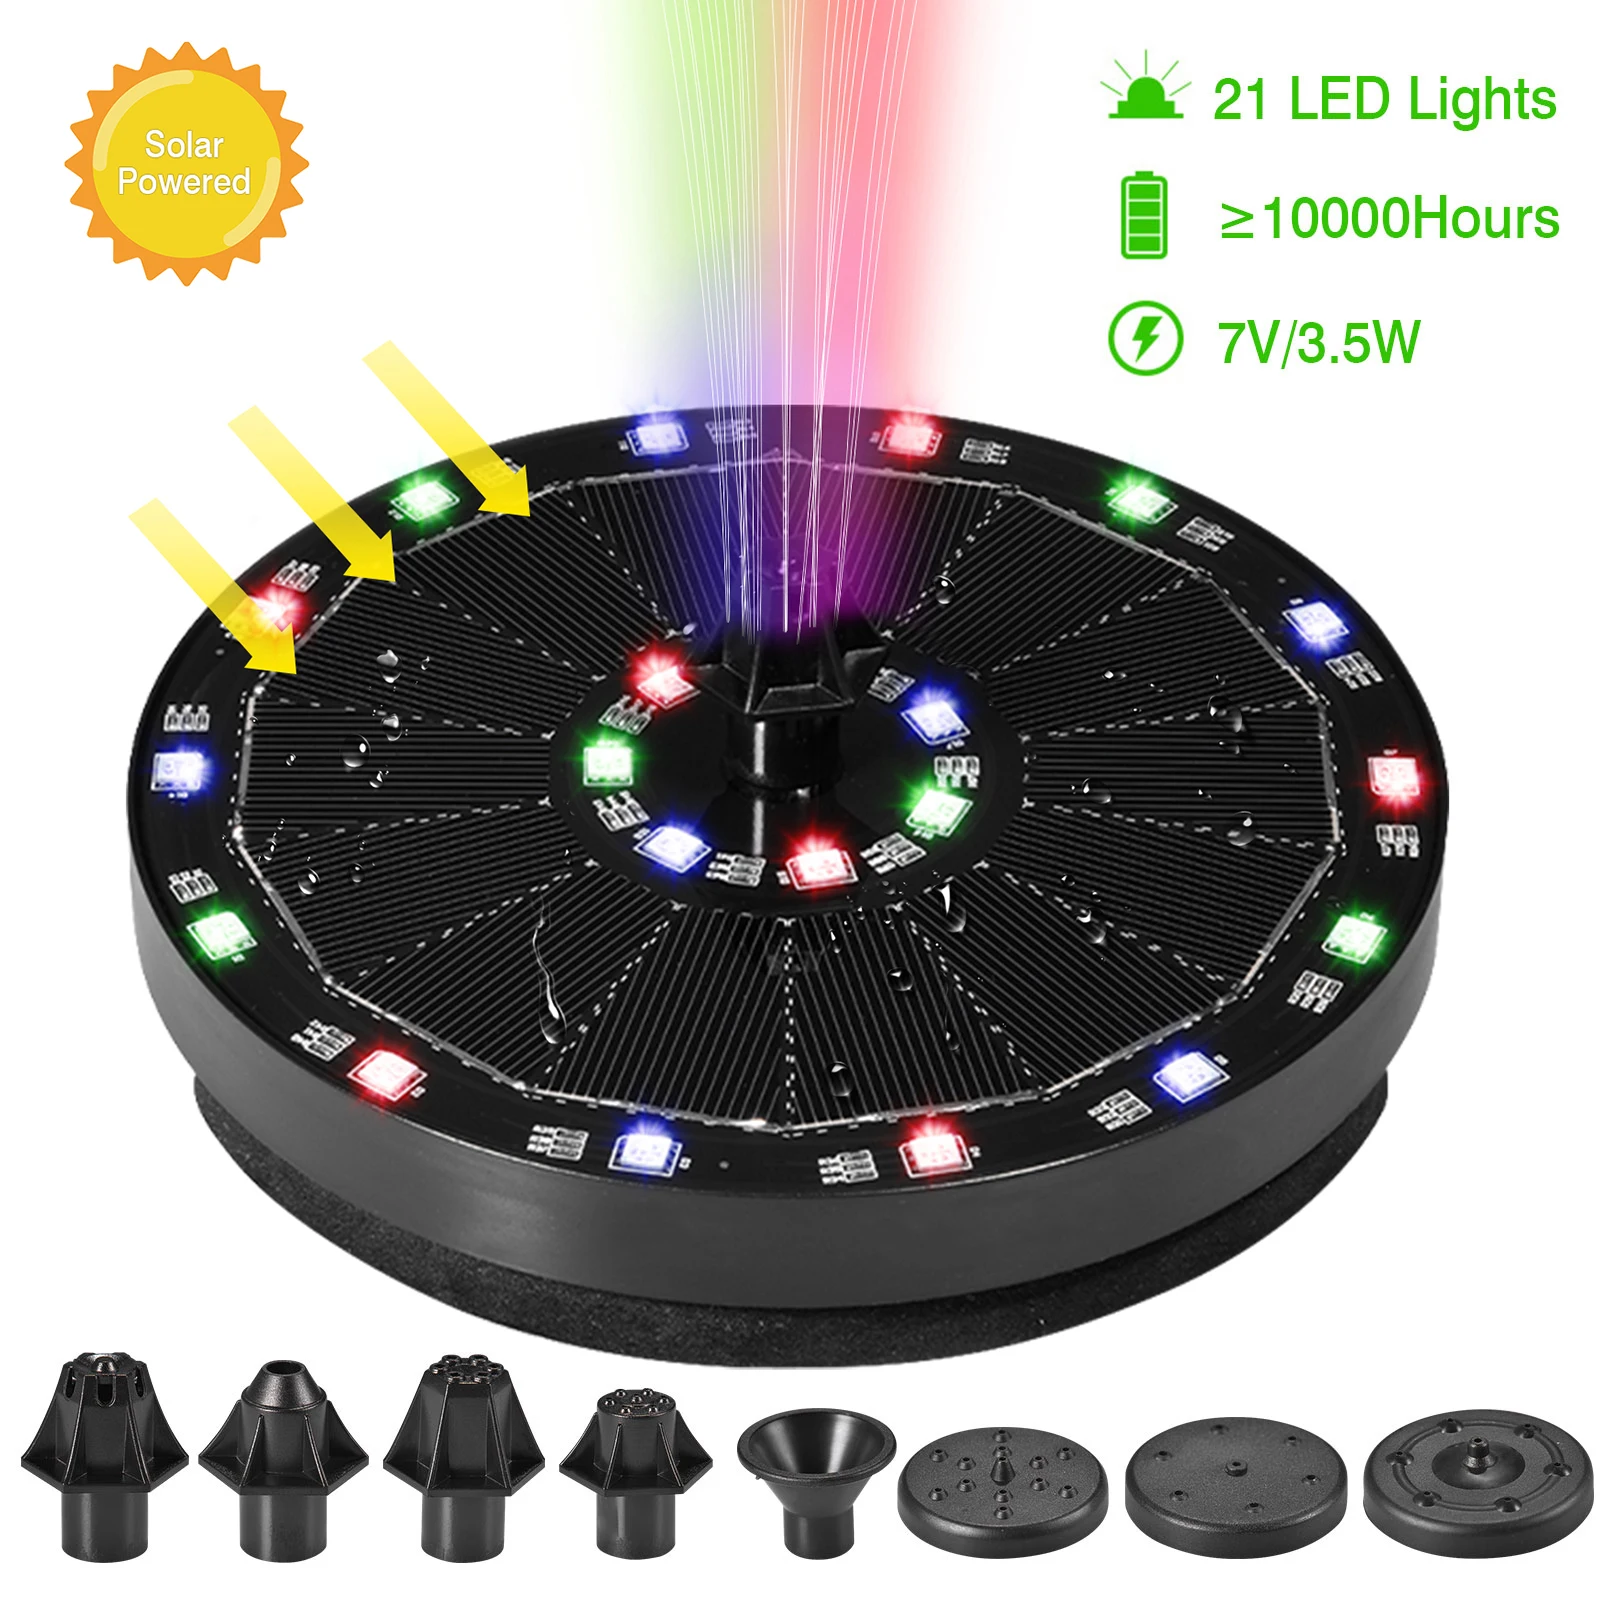 7V/3.5W Solar Fountain 2 in-1 Pools Fountains Colorful 21 Lights Swimming Pump Panel Solar Powered Fountains Garden Decor